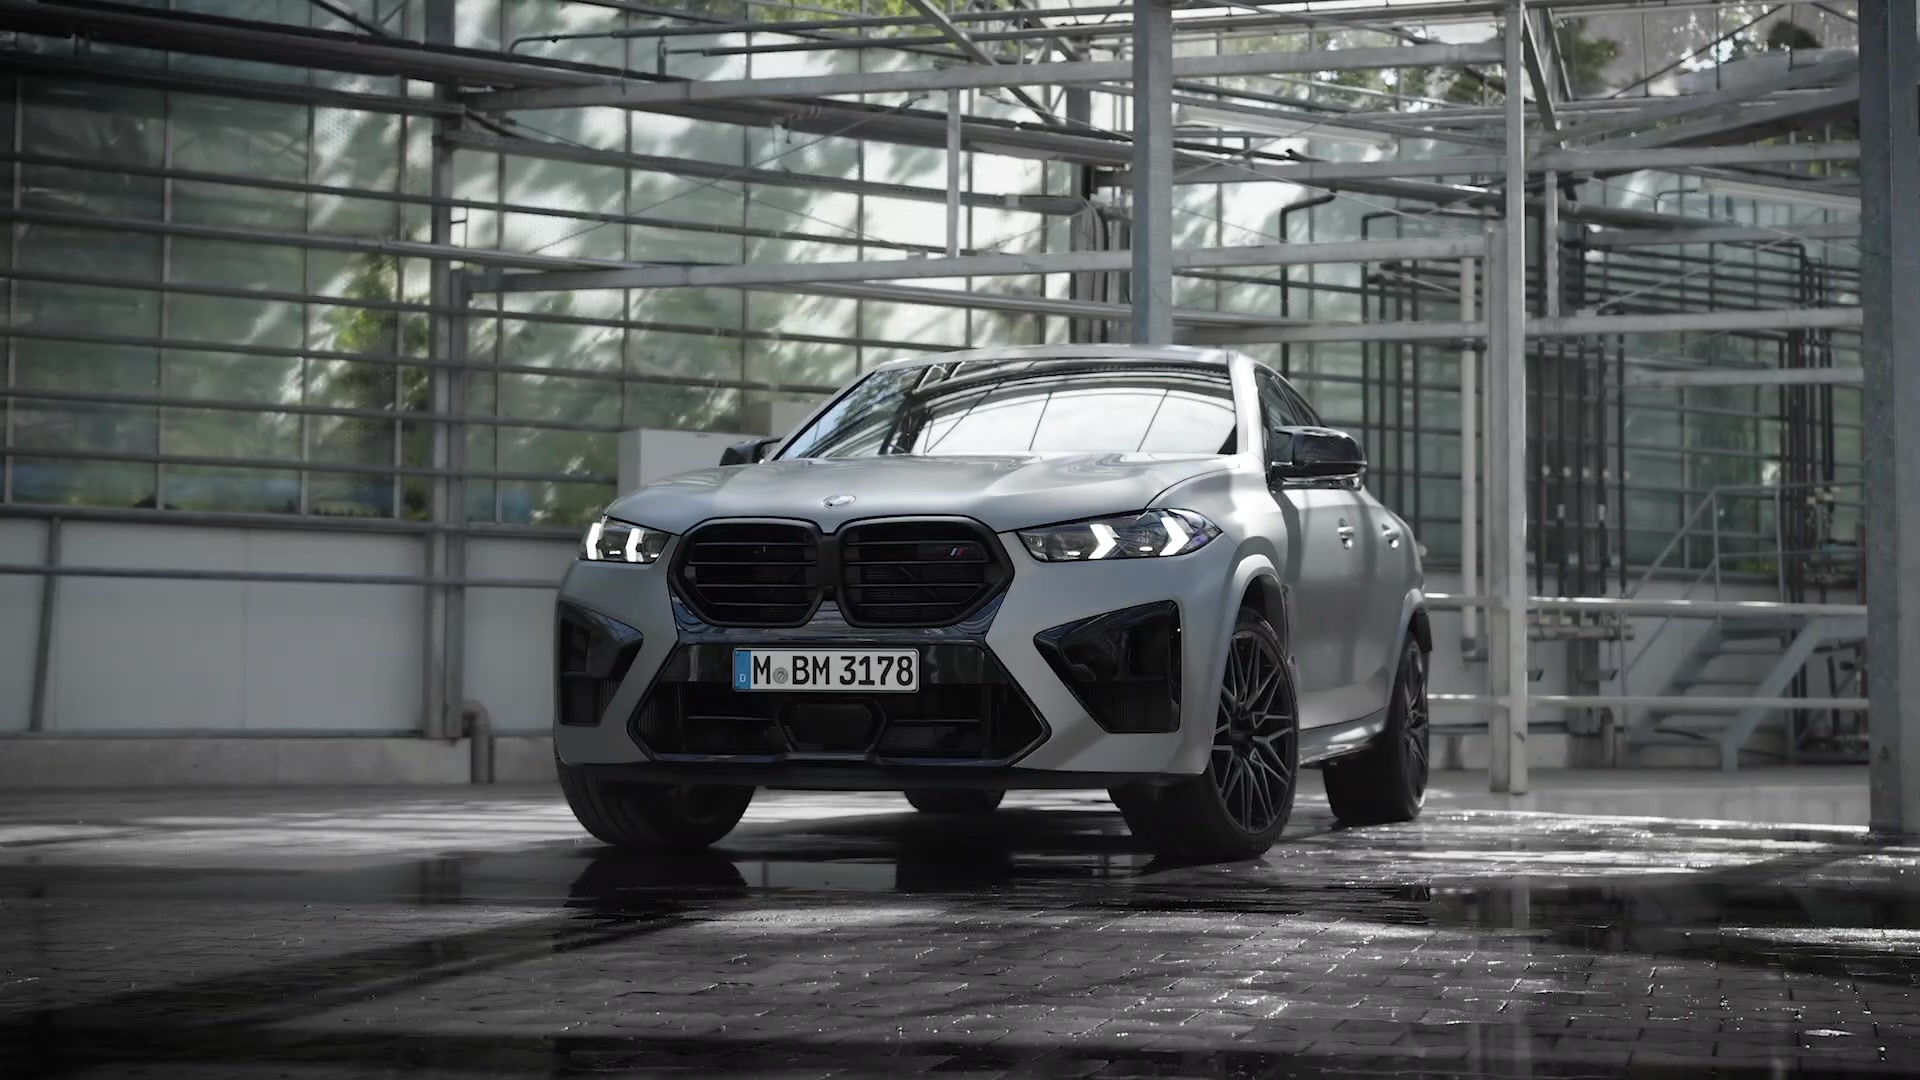 The new BMW X6 M Competition Exterior Design